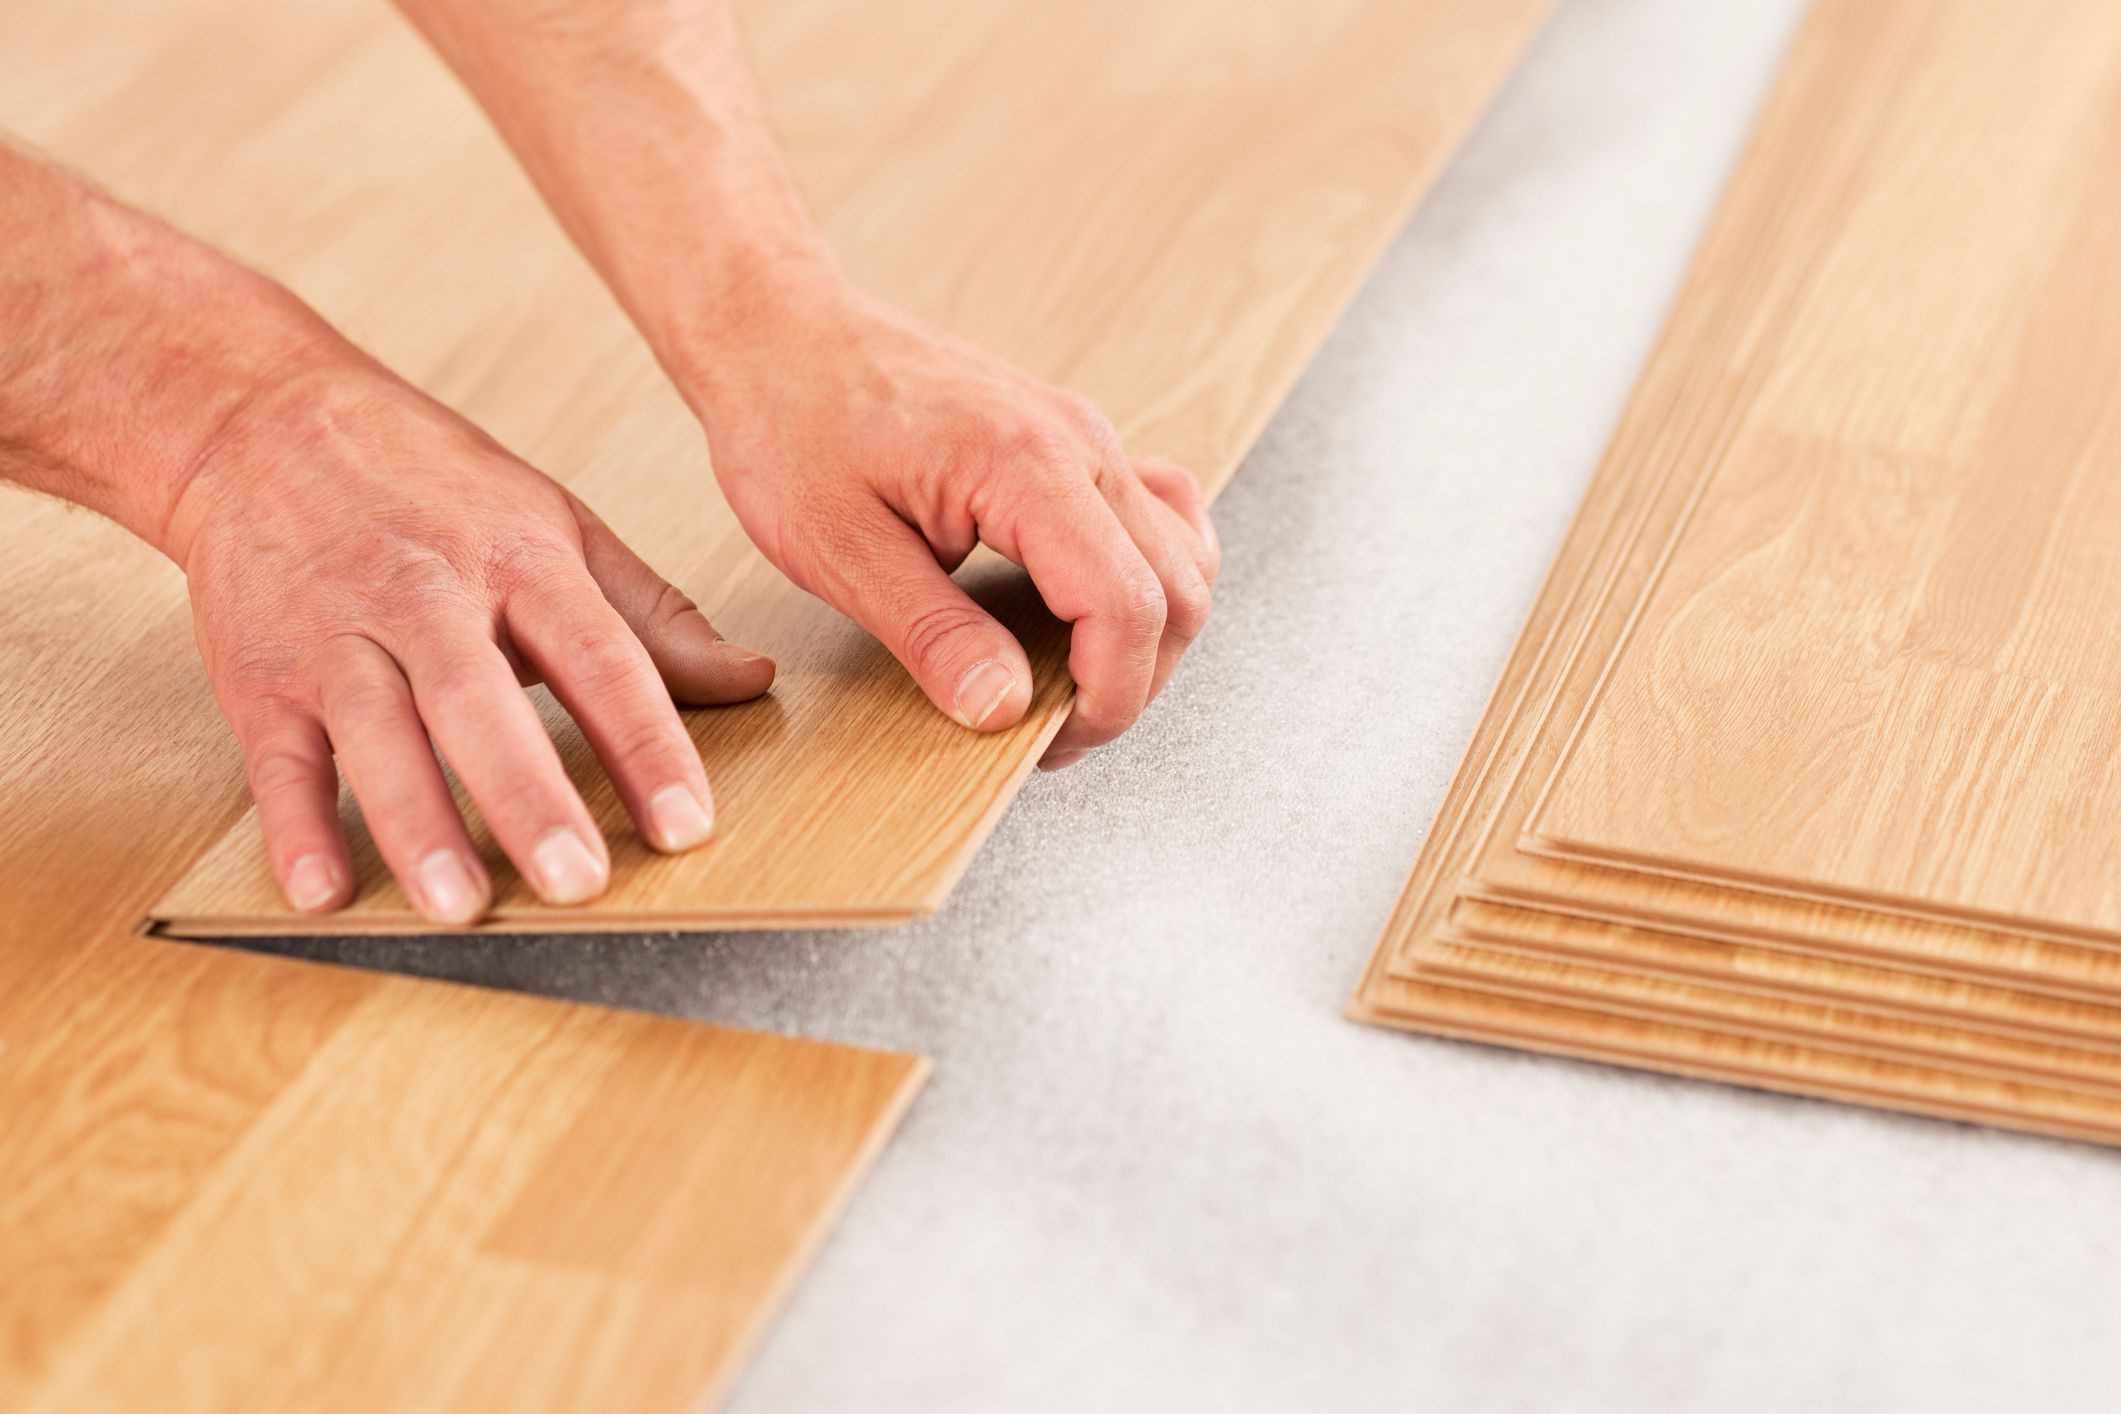 15 Lovely Tg Hardwood Floor Specialists 2024 free download tg hardwood floor specialists of laminate underlayment pros and cons inside laminate floor install gettyimages 154961561 588816495f9b58bdb3da1a02